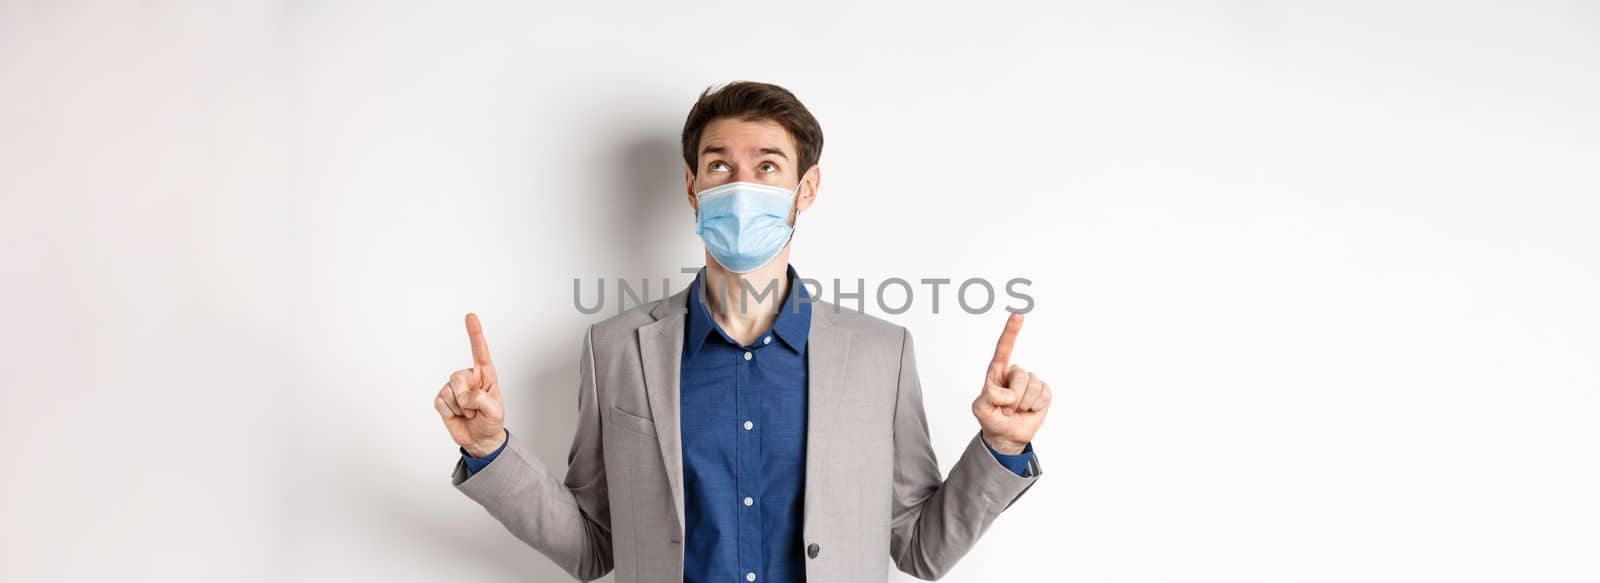 Covid-19, pandemic and business concept. Handsome businessman in medical mask and suit, looking and pointing up with dreamy face, white background.